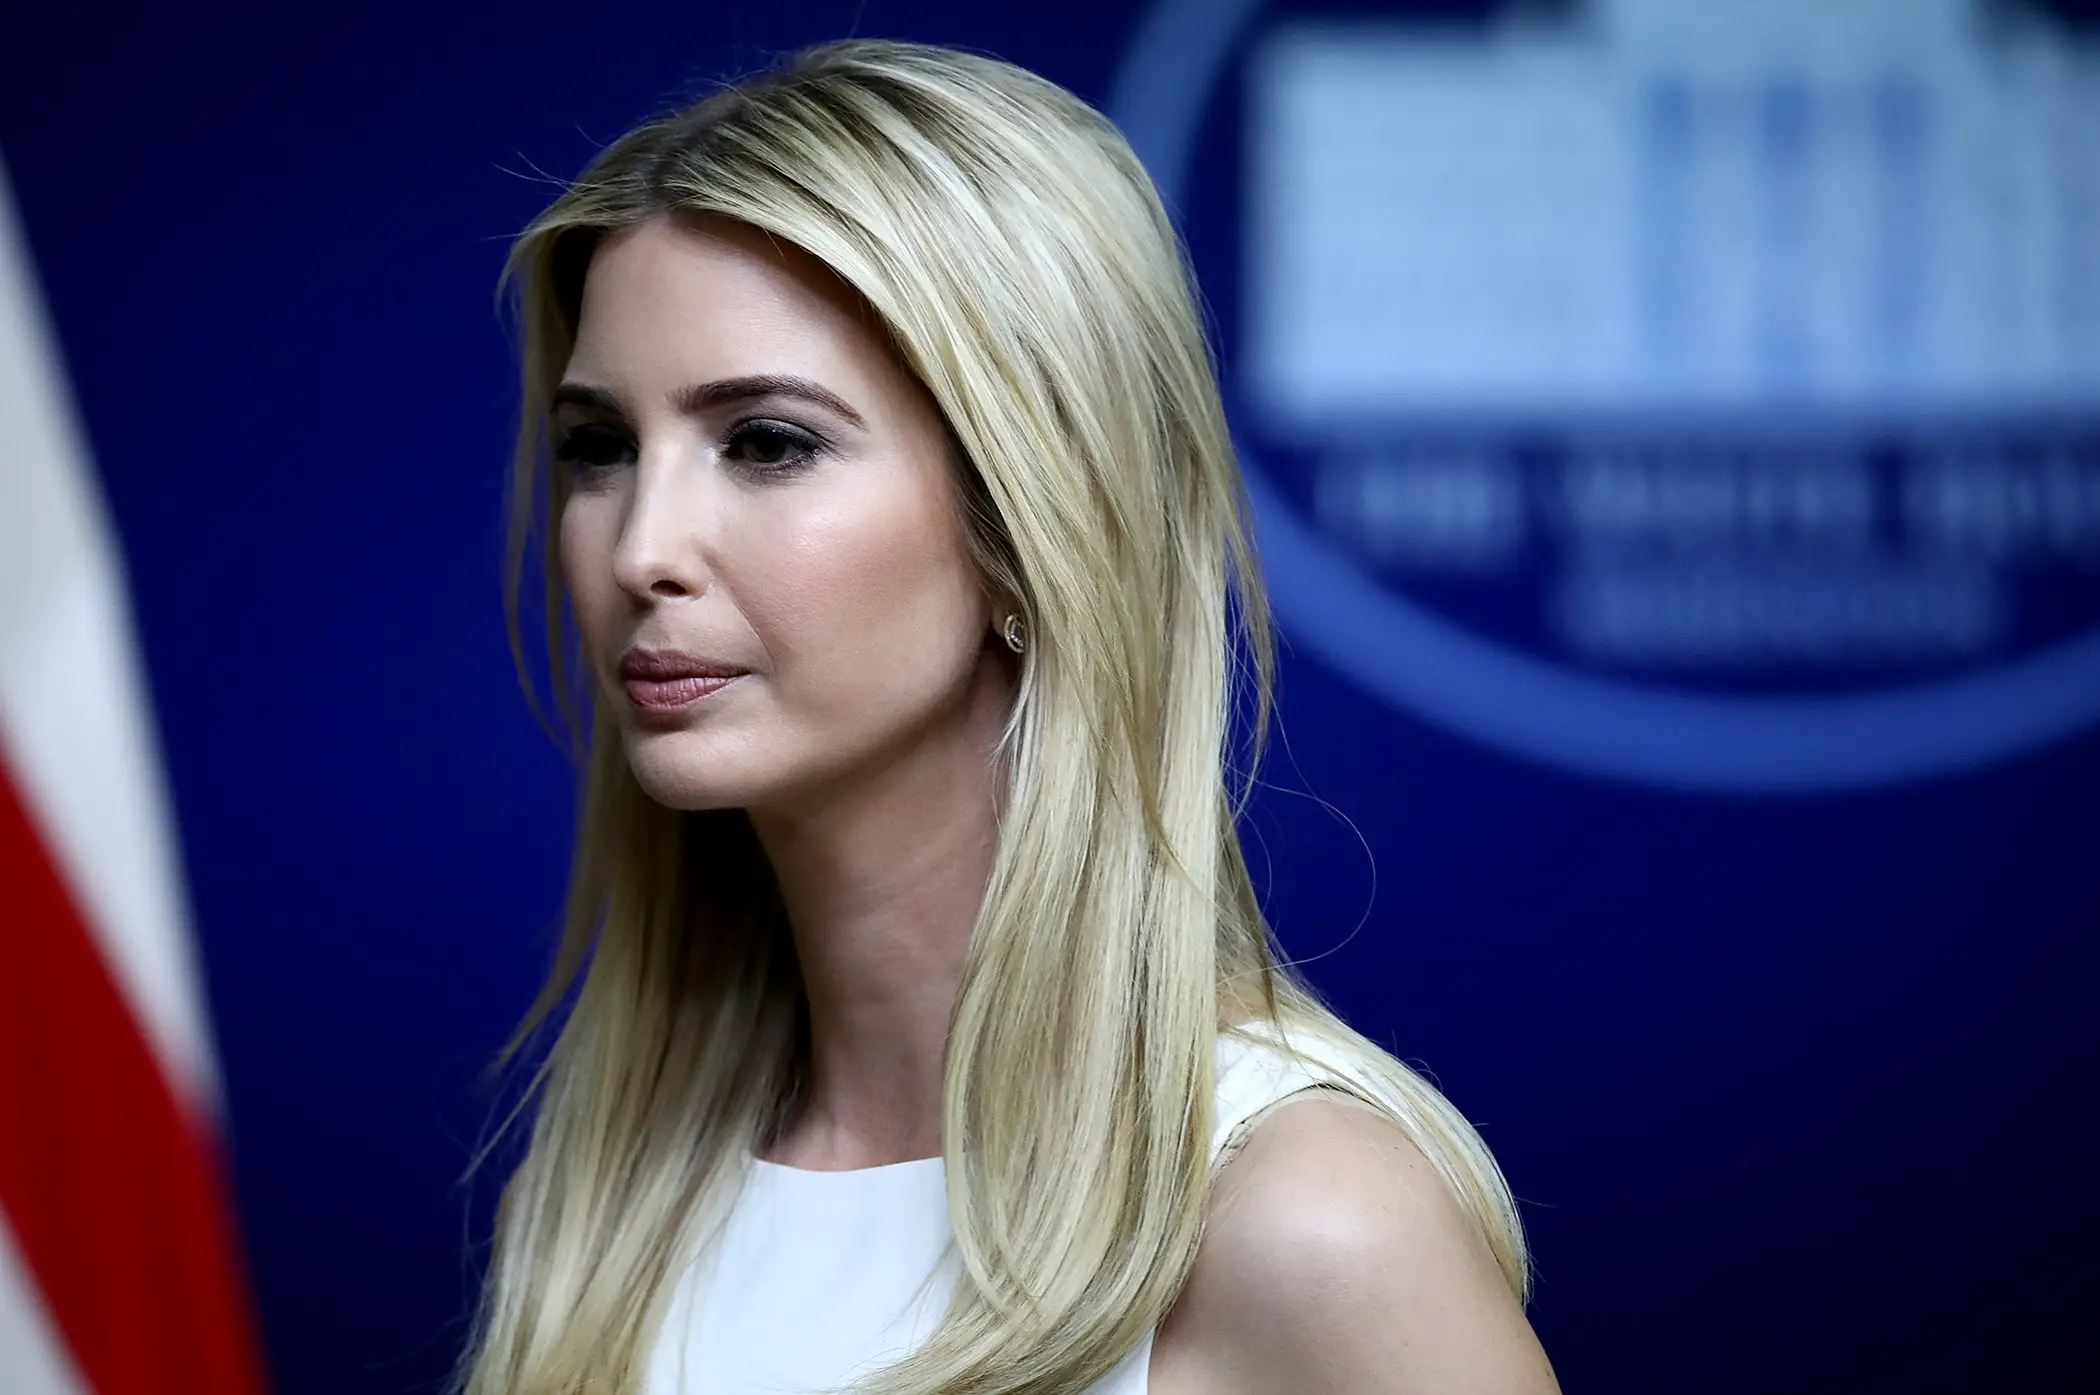 Ivanka Trump Clothing Sold at Stein Mart with Changed Labels